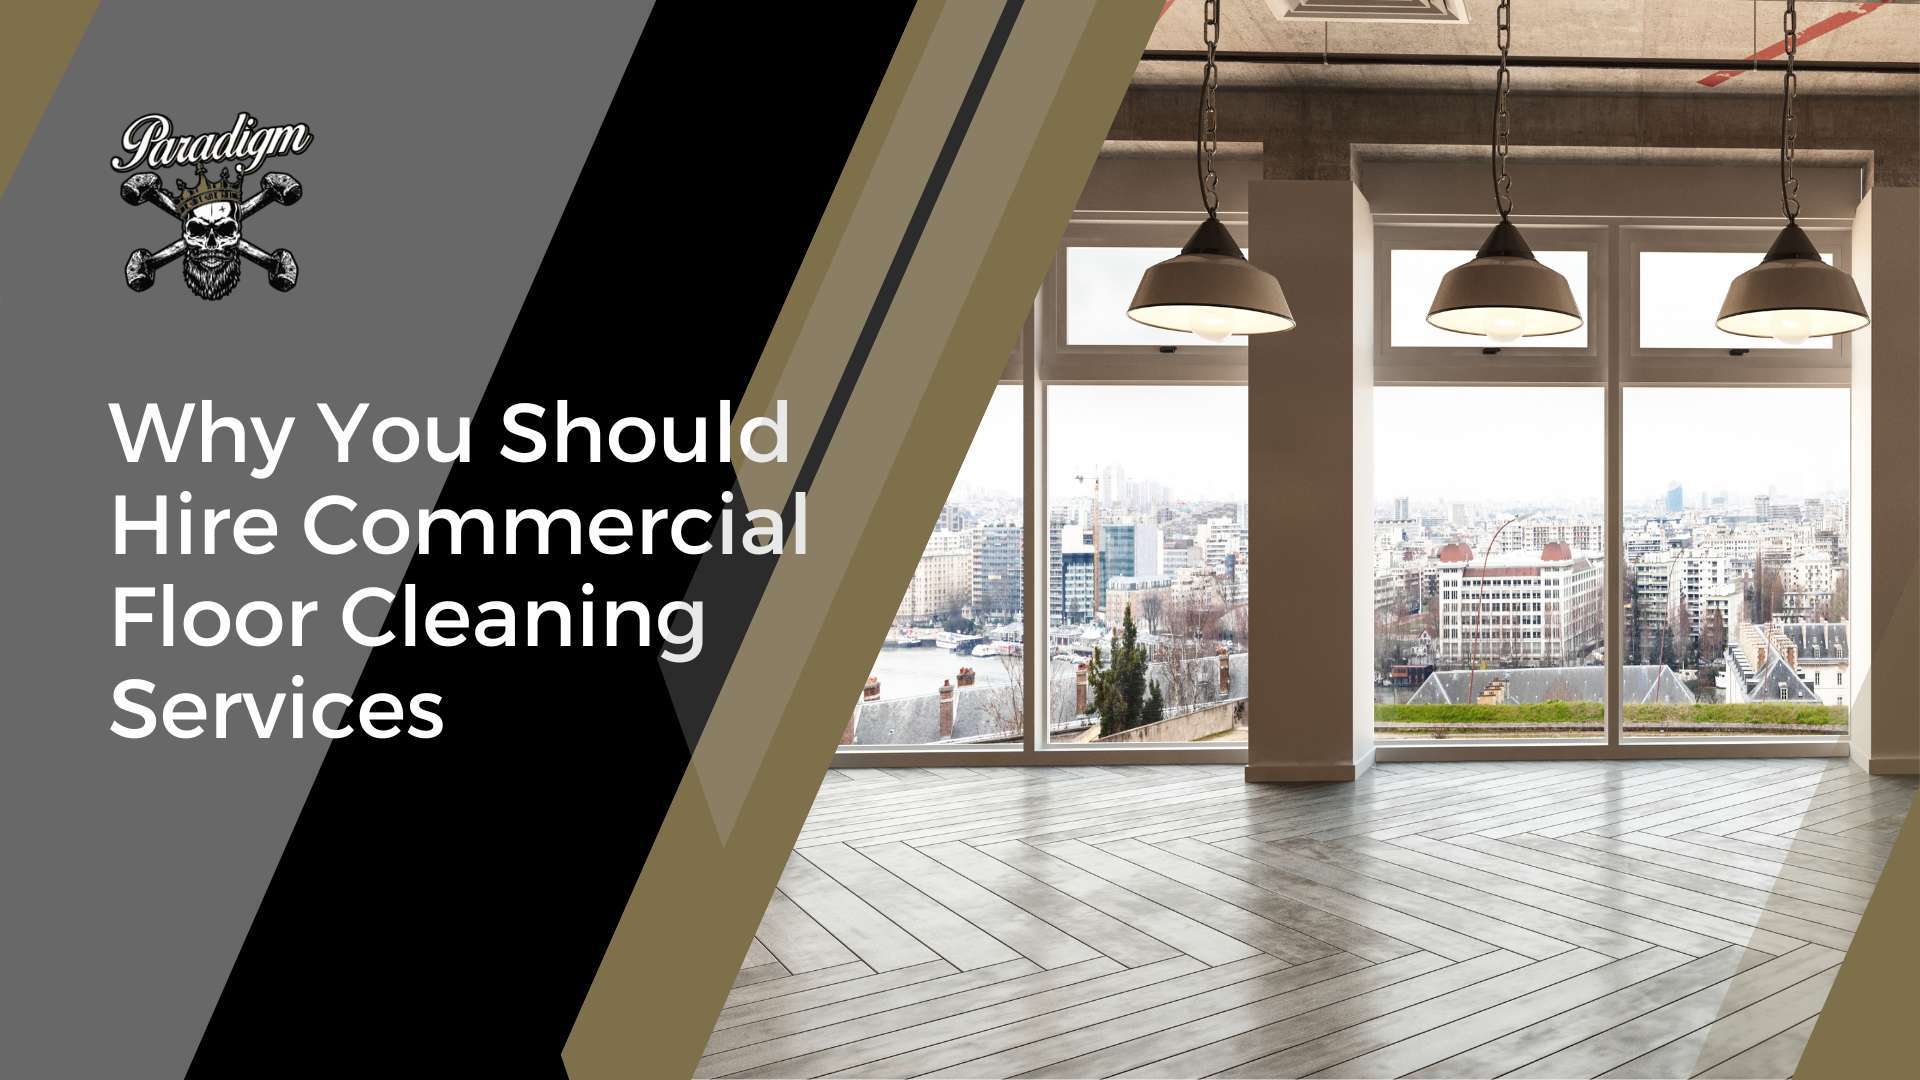 Why You Should Hire Commercial Floor Cleaning Services